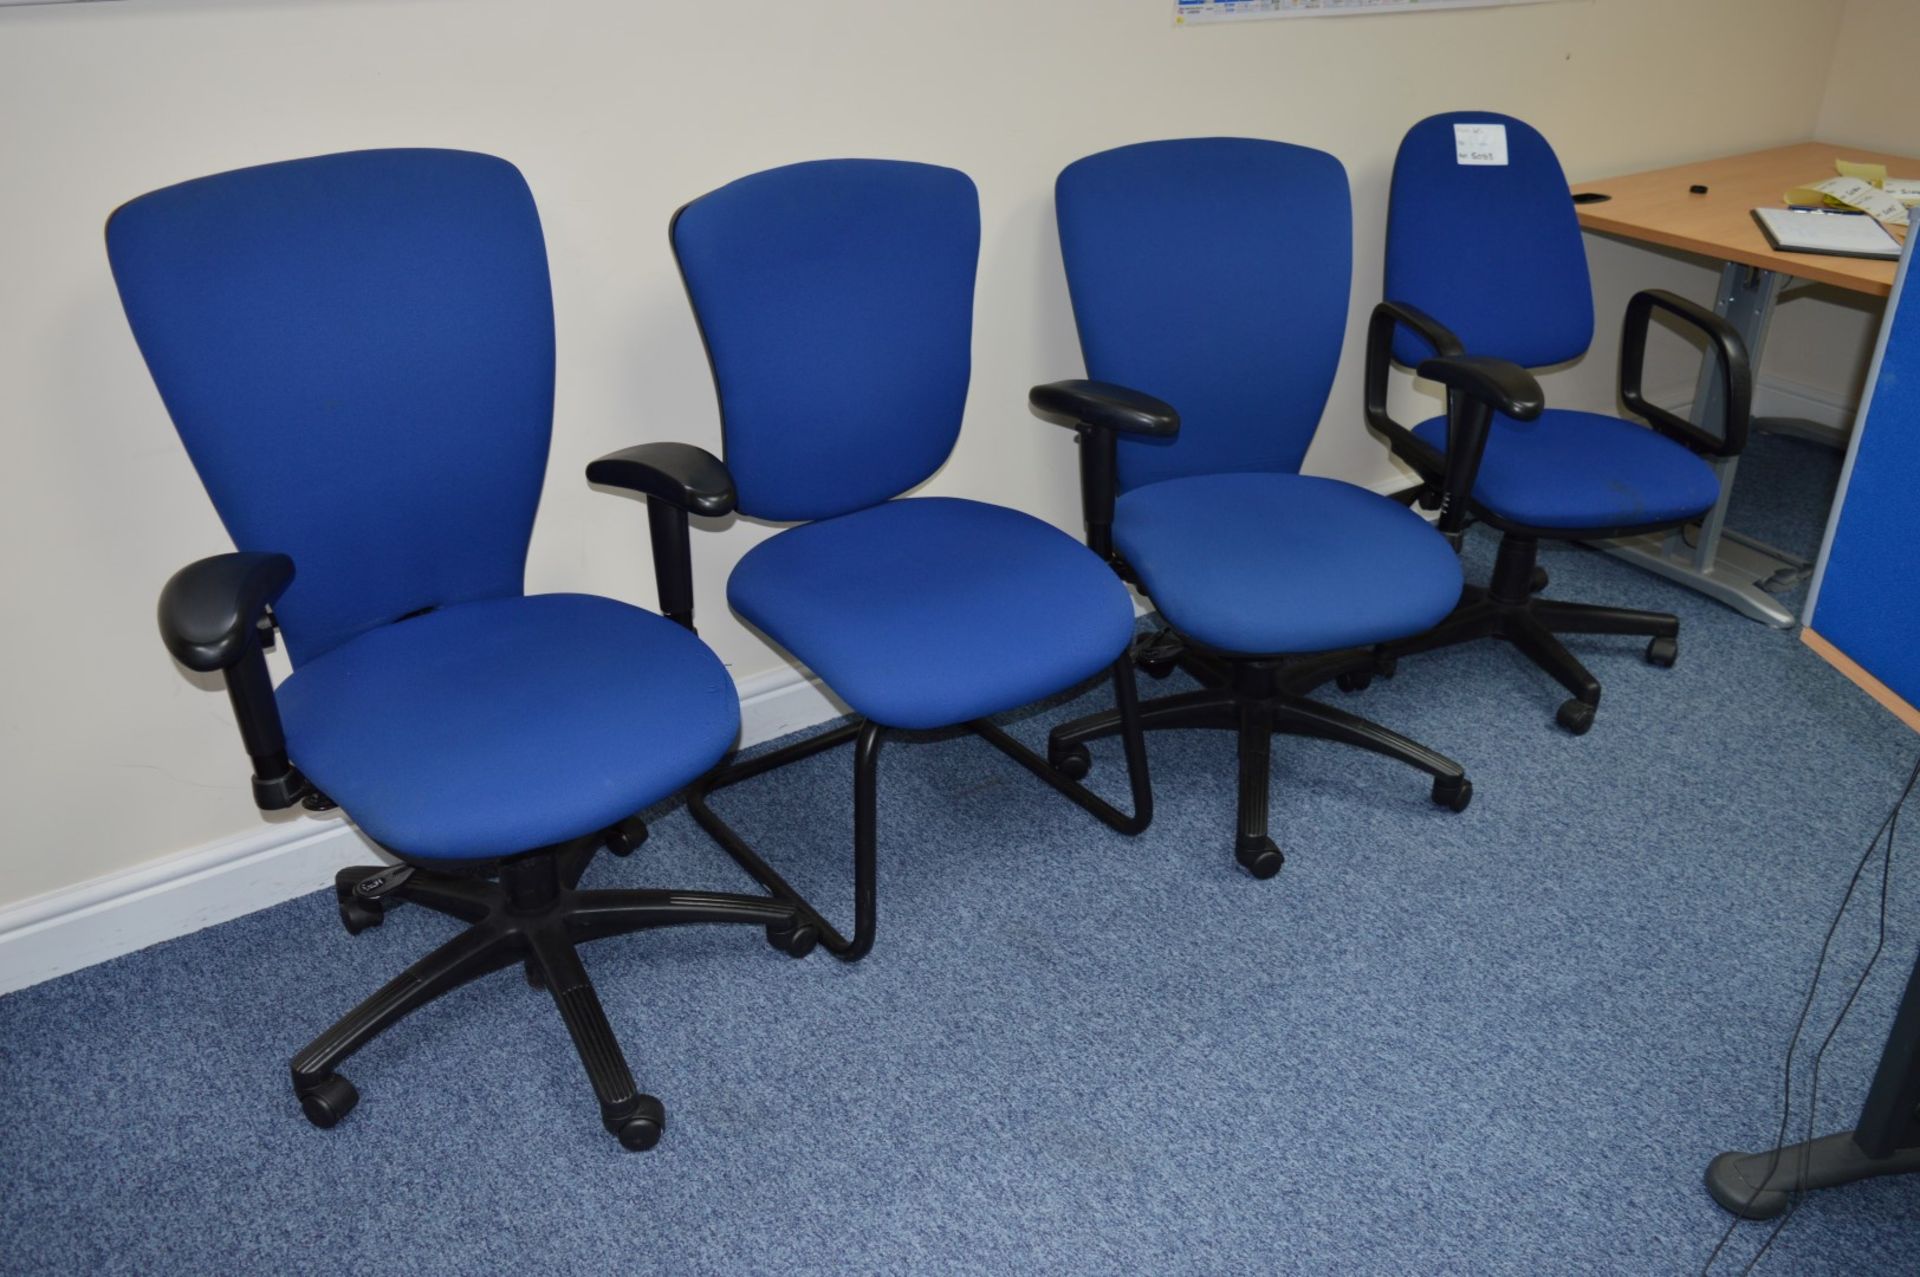 4 x Various Office Chairs - Includes Reception and Swivel Chairs - CL300 - Ref S083 - Location: